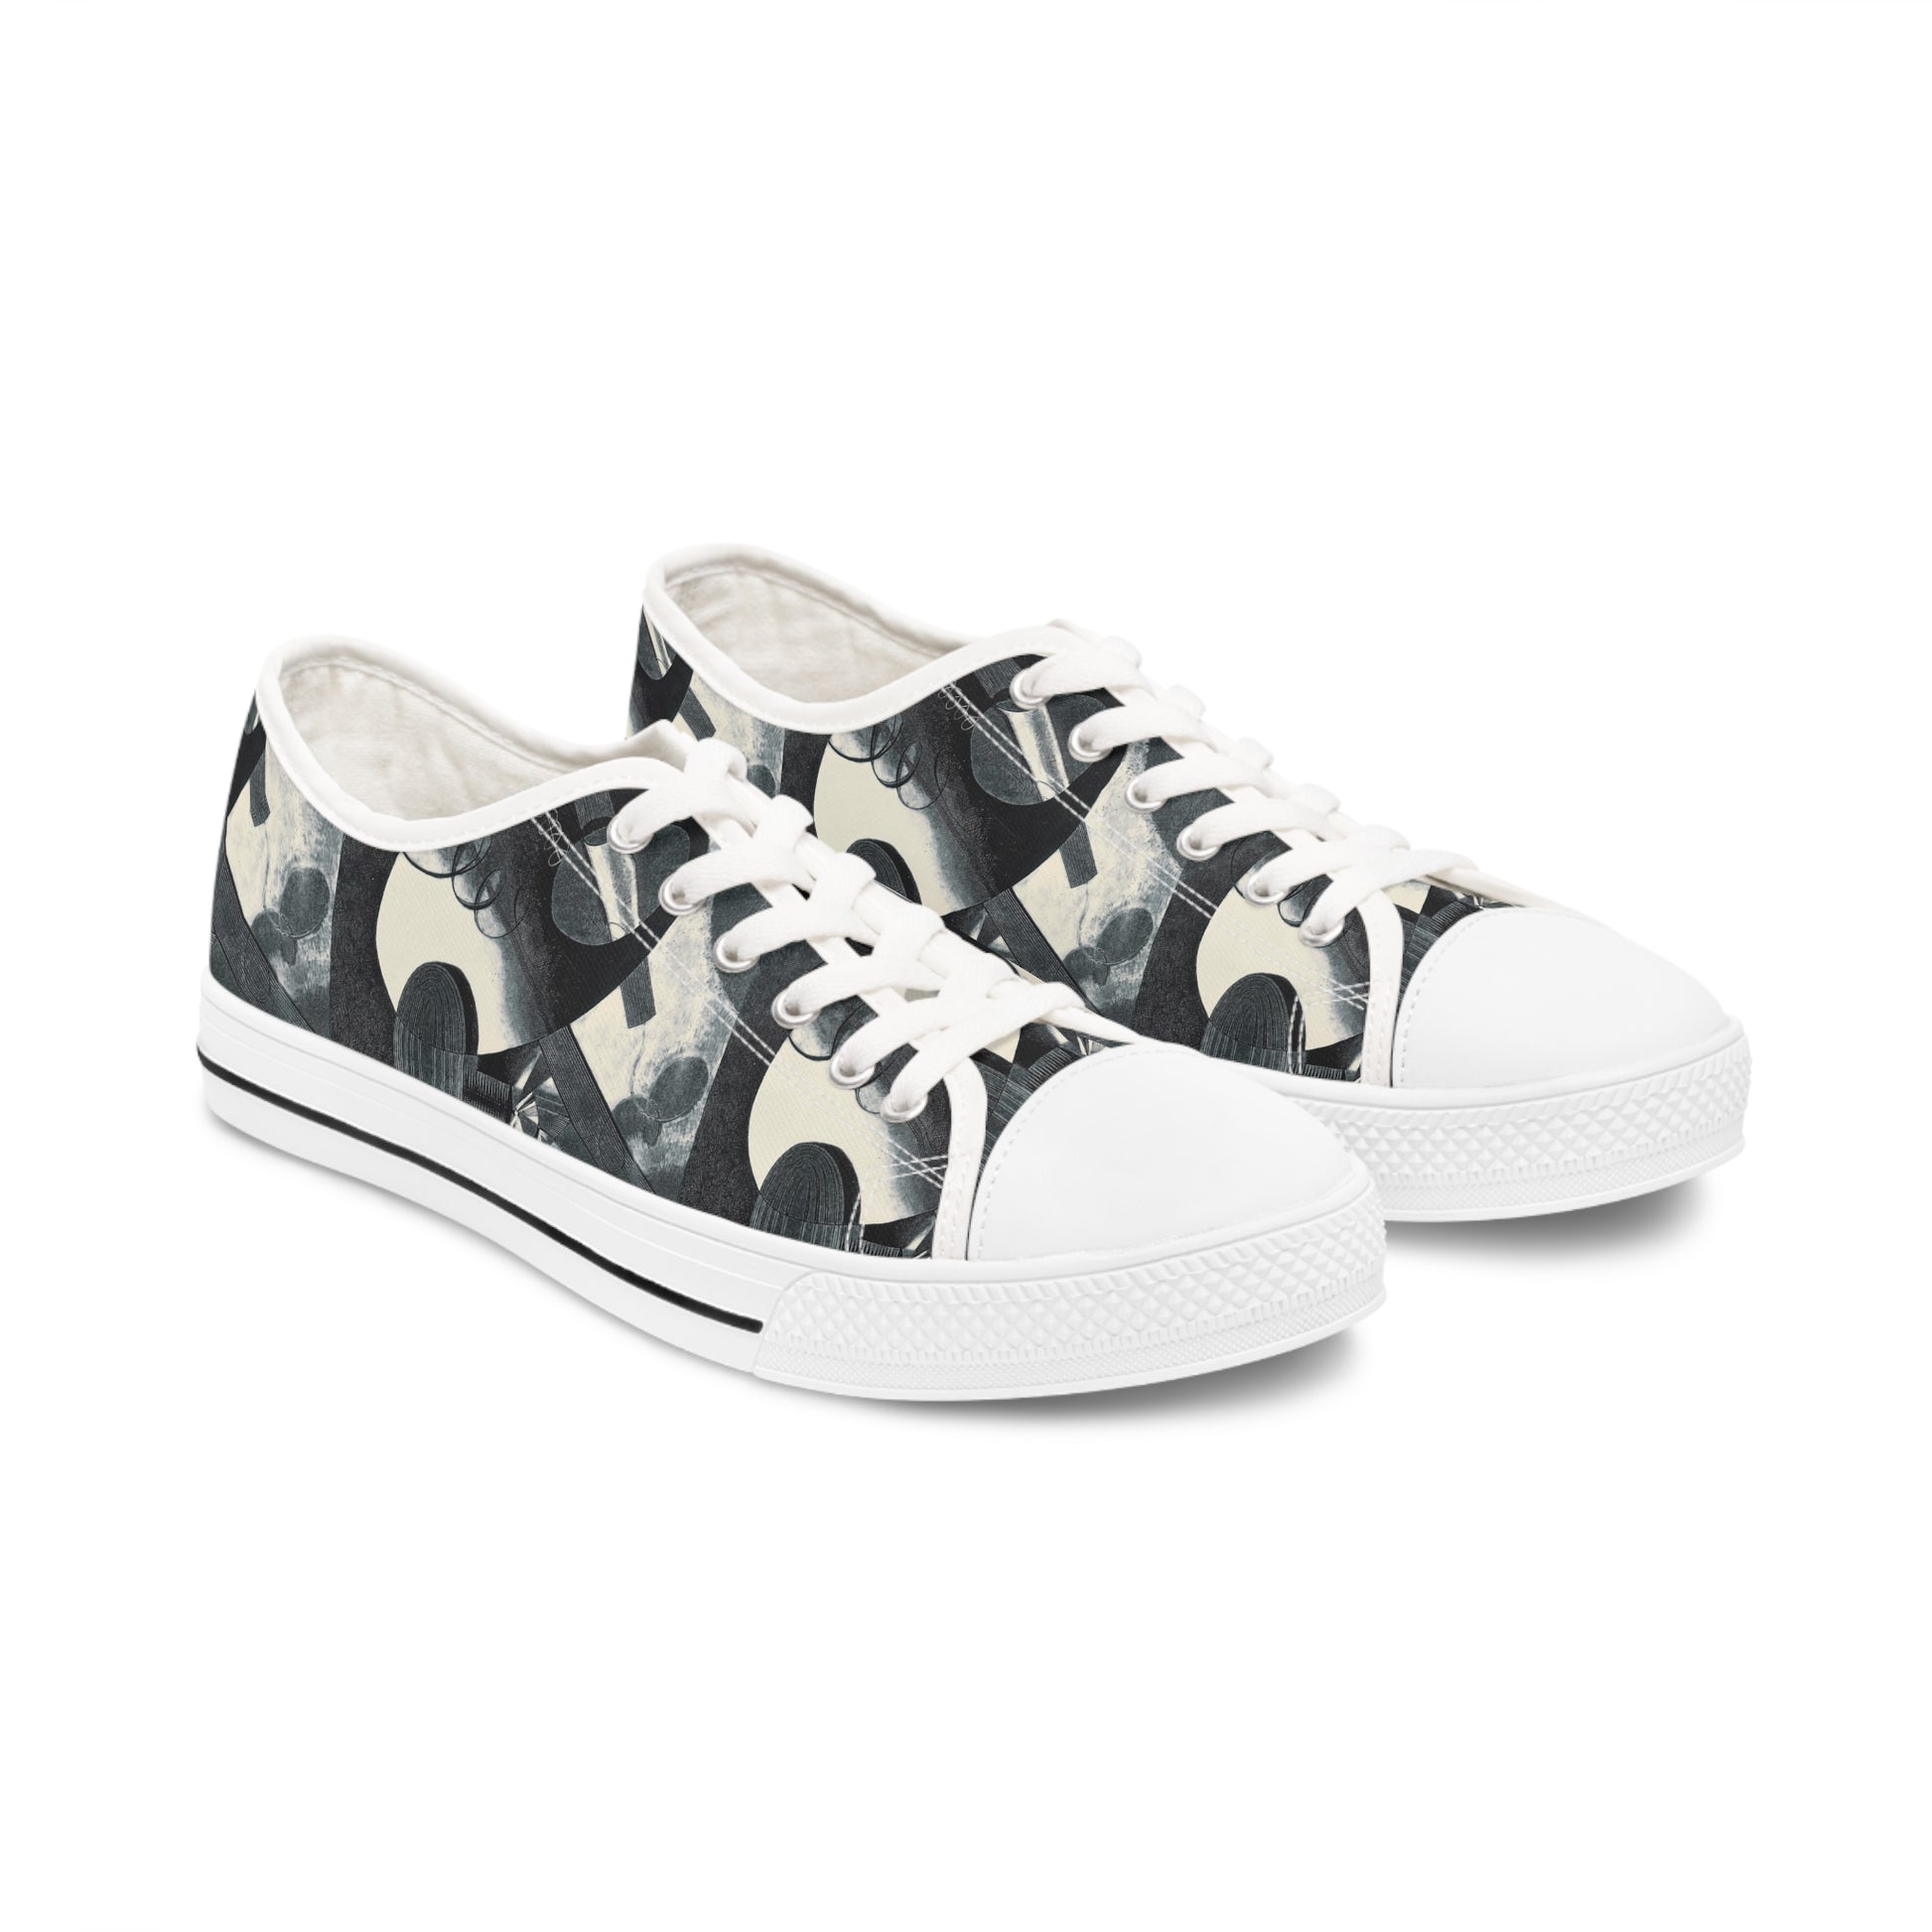 KAROL HILLER - HELIOGRAPHIC COMPOSITION (XXIX) - LOW TOP ART SNEAKERS FOR HER